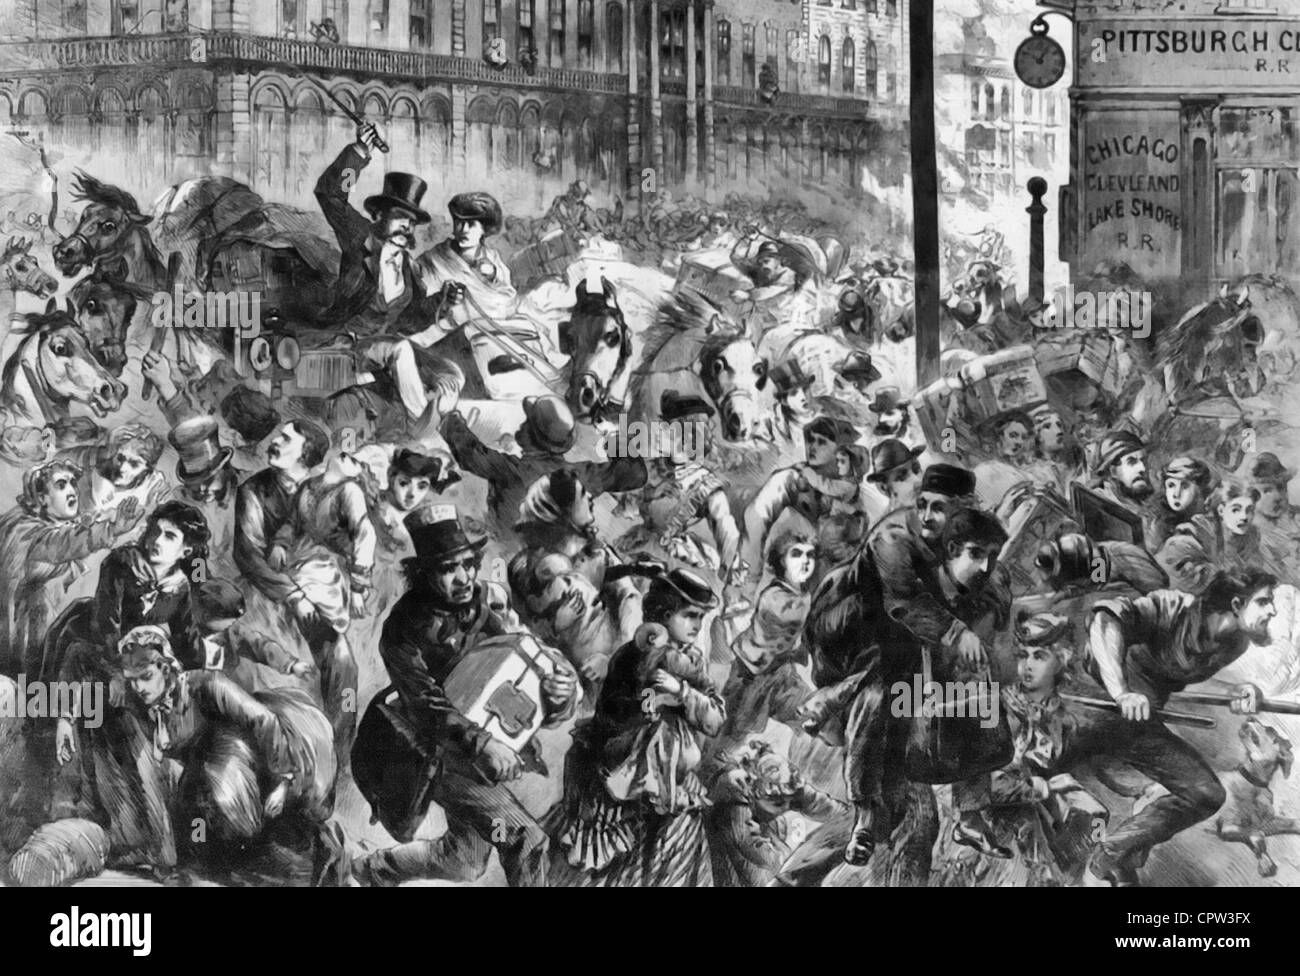 The great fire in Chicago - panic stricken citizens rushing past the Sherman House, 1871 Stock Photo